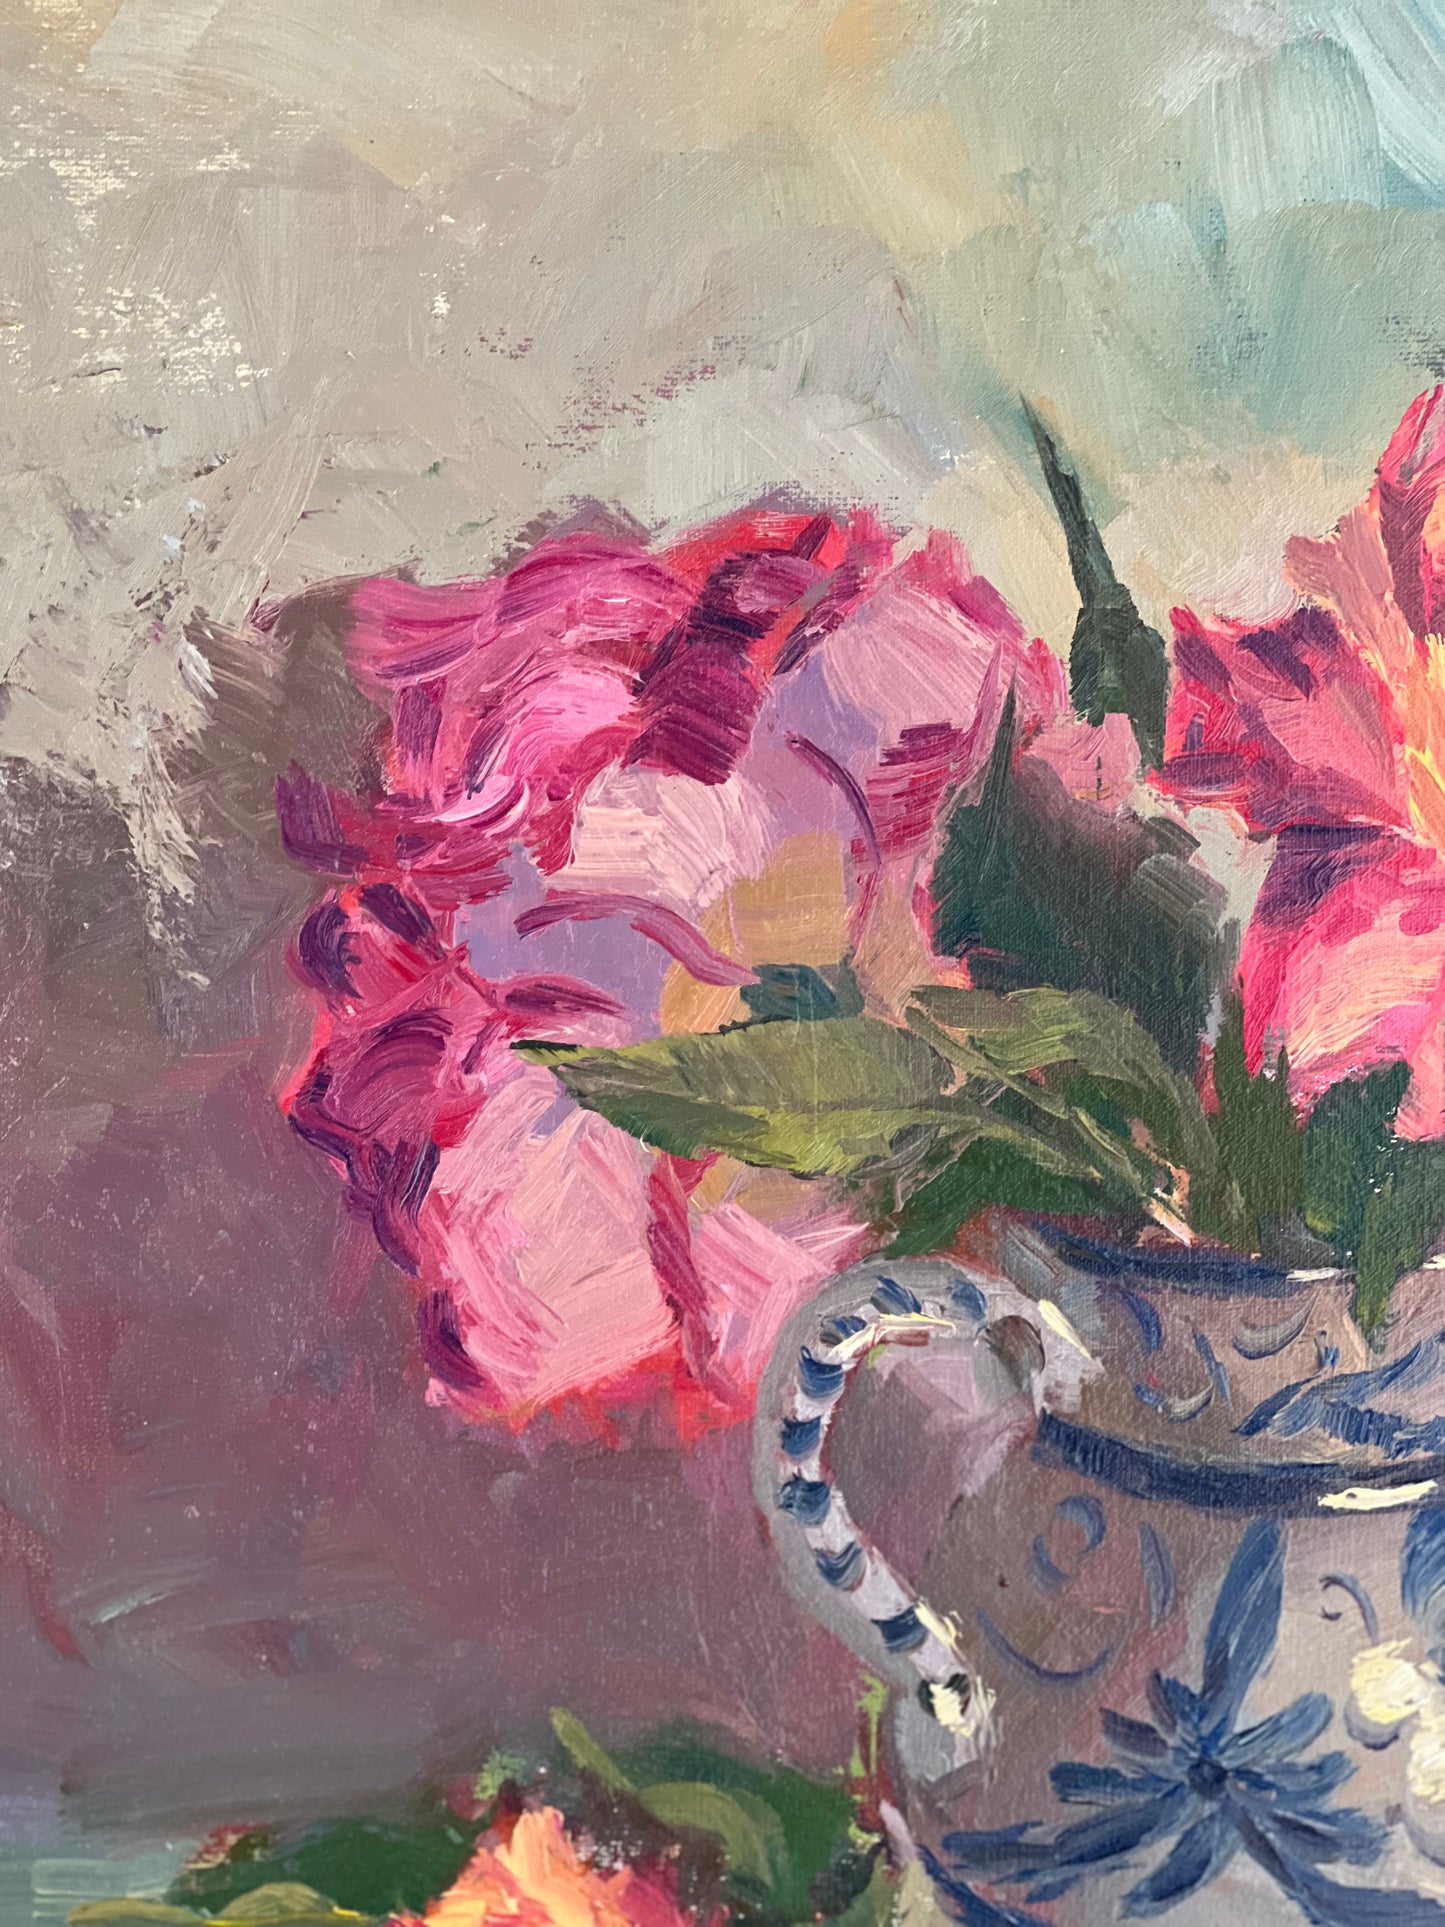 Large Oil Painting of Roses - Garden roses in my studio!